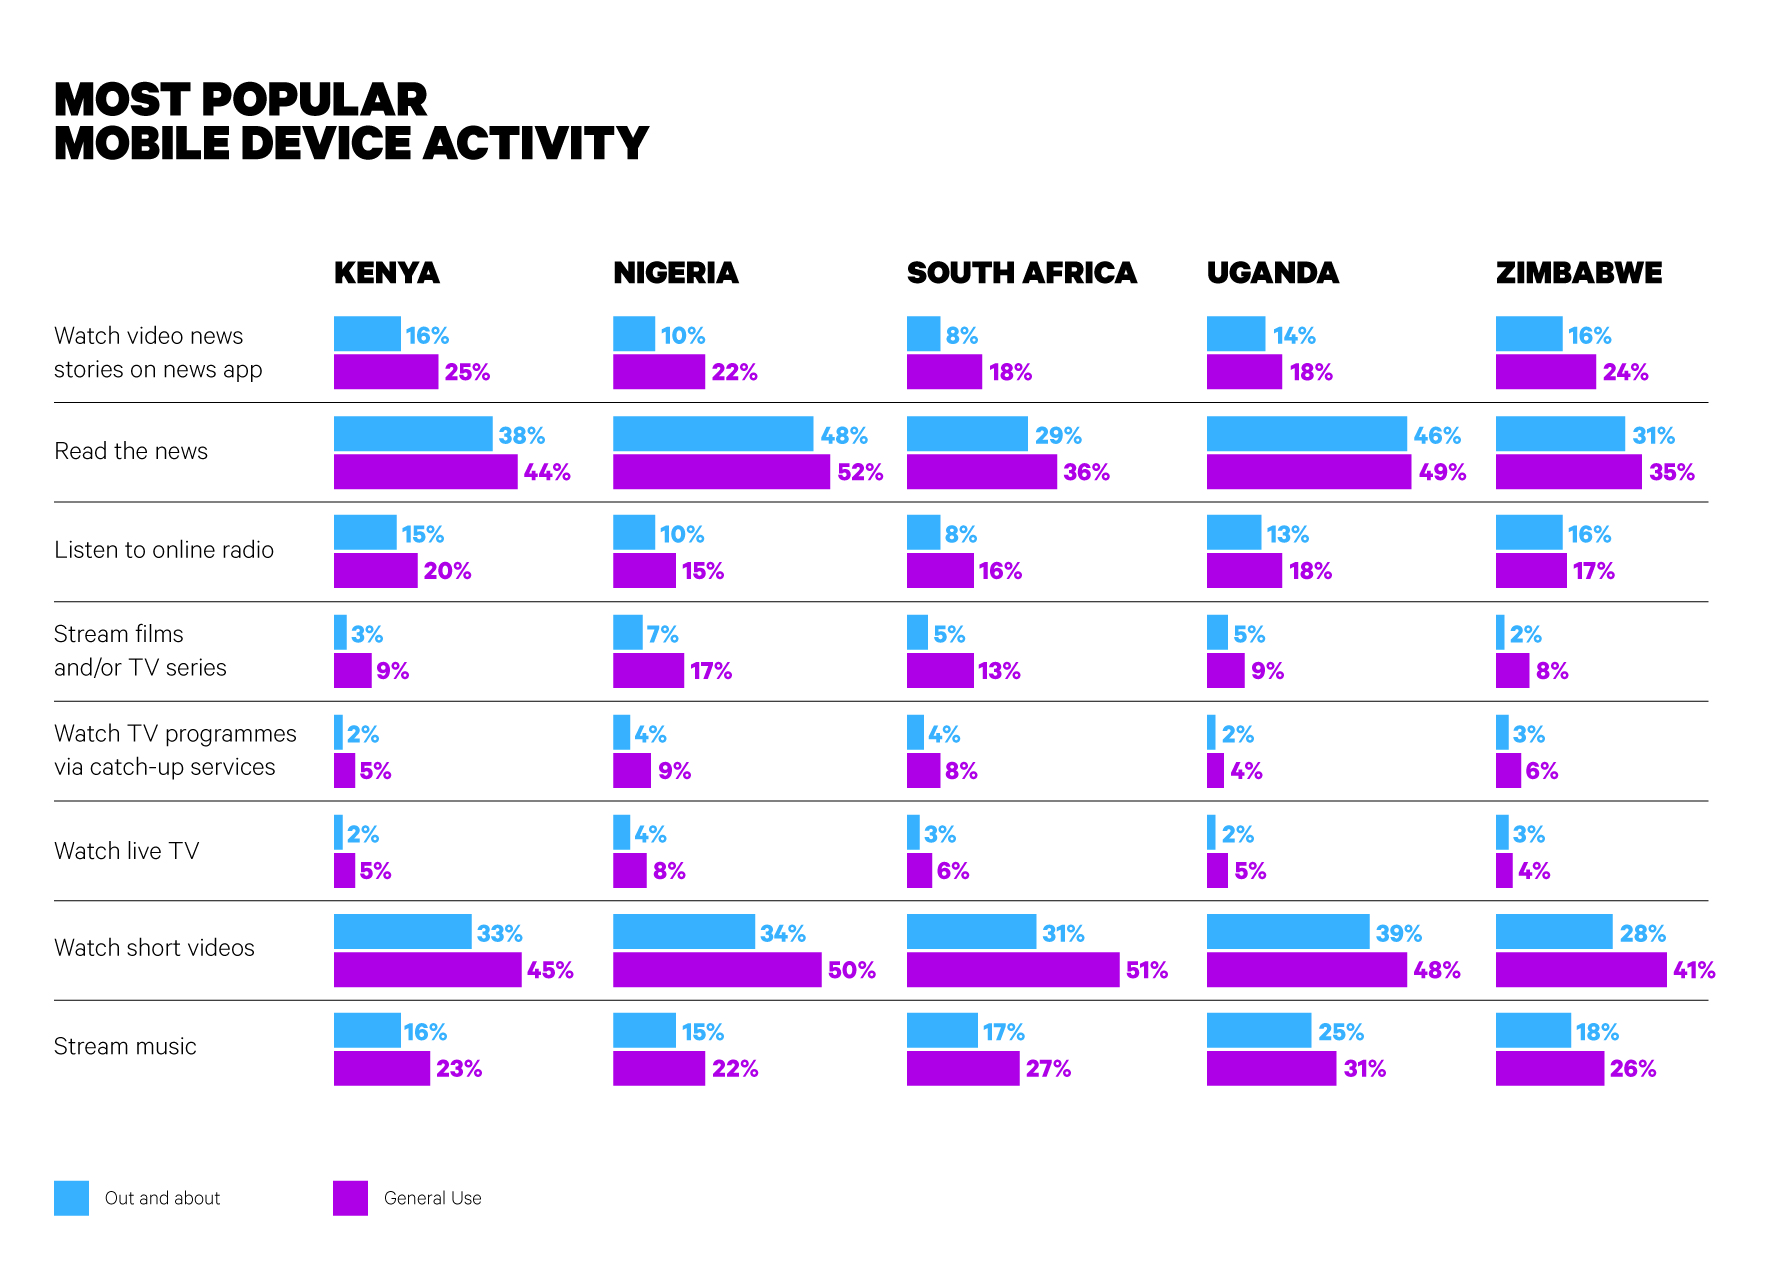 Most popular mobile device activity